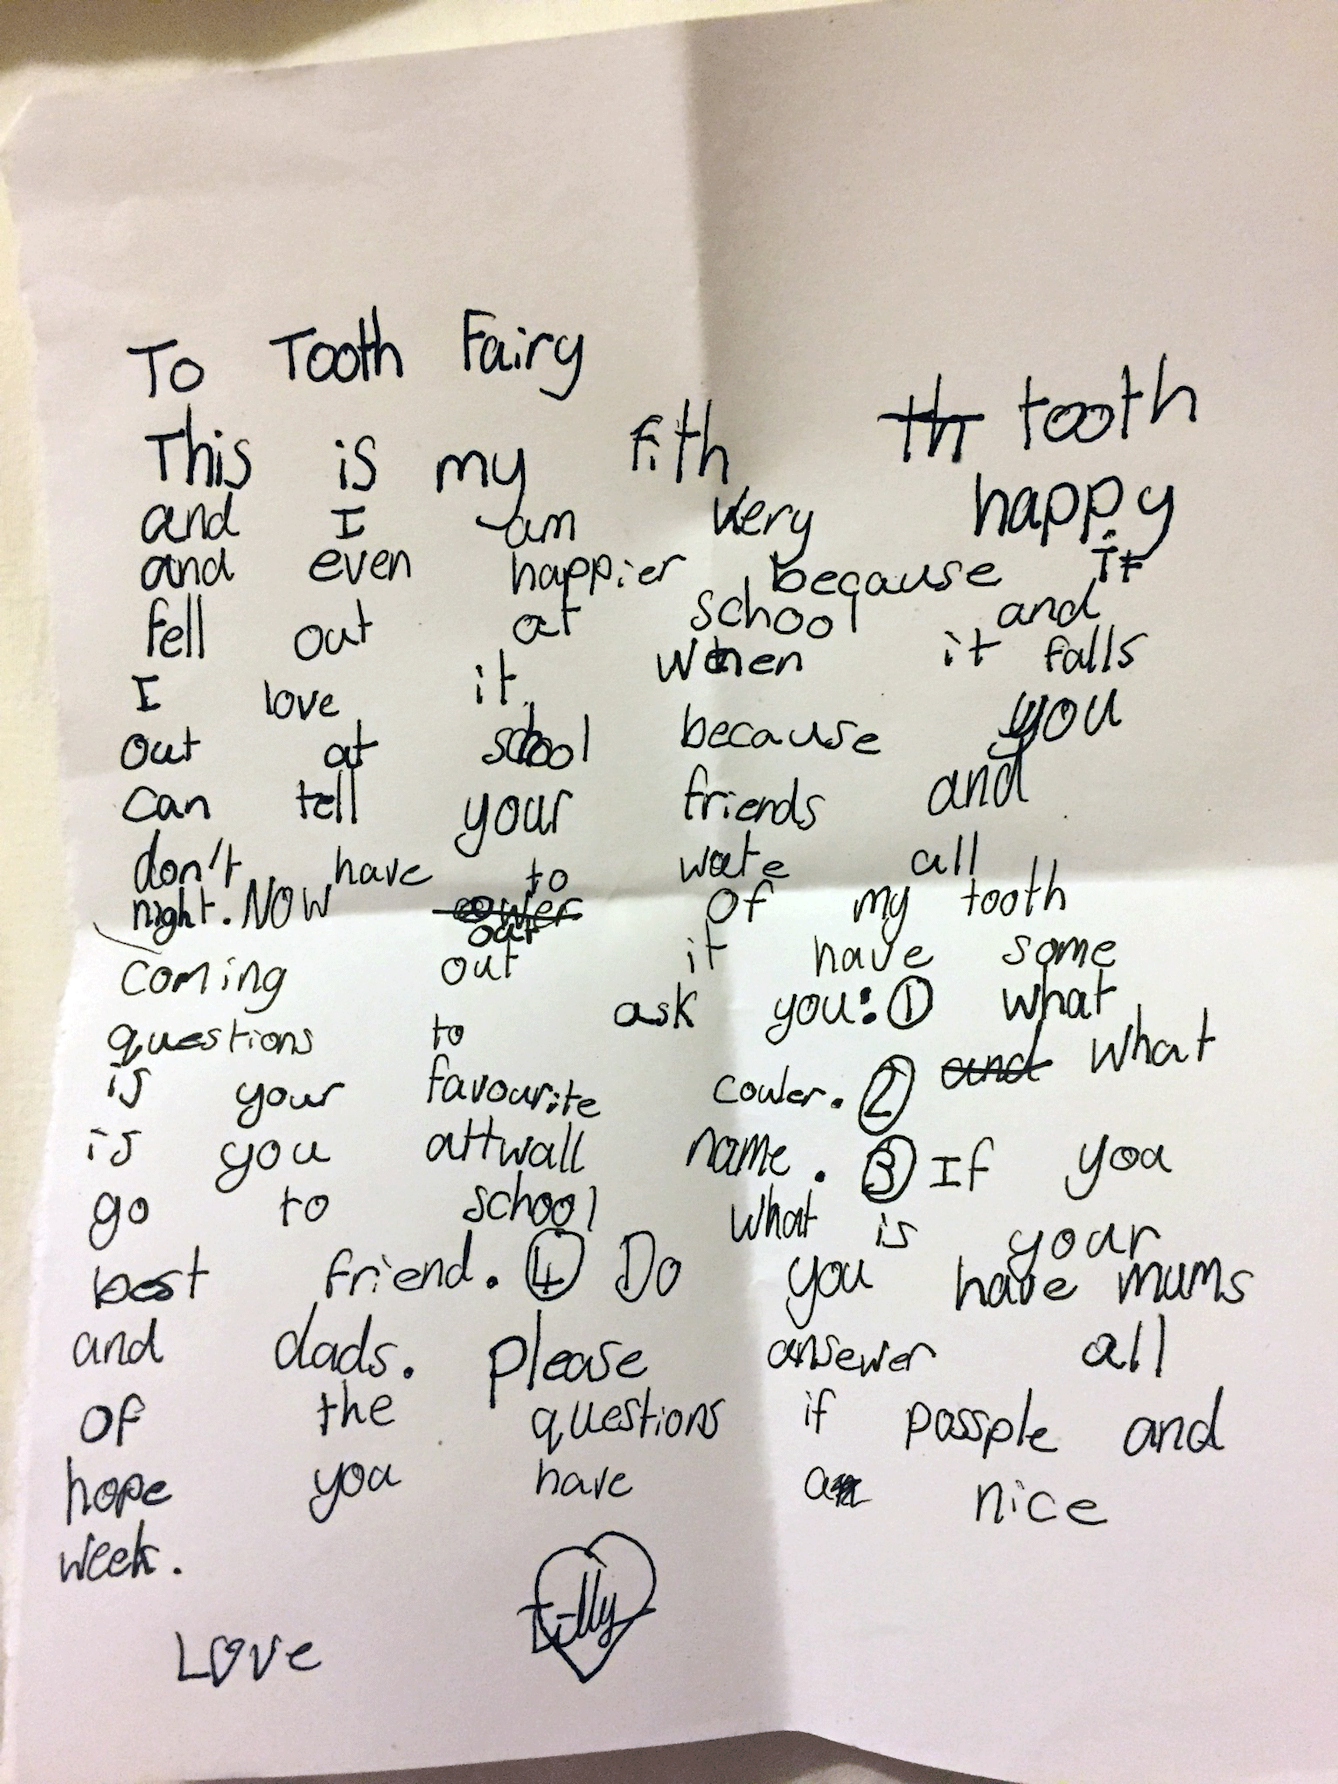 Letter. Reads: To Tooth Fairy. This is my fifth tooth and I am very happy, and even happier because it fell out at school, and I love it when it falls out at school because you can tell your friends and don't have to wait all night. Now out of my tooth coming out, I have some questions to ask you: 1) What is your favourite colour?2) What is your art wall name? 3) If you go to school, who is your best friend? 4) Do you have mums and dads? Please answer all of the questions if possible, and hope you have a nice week. Love Tilly